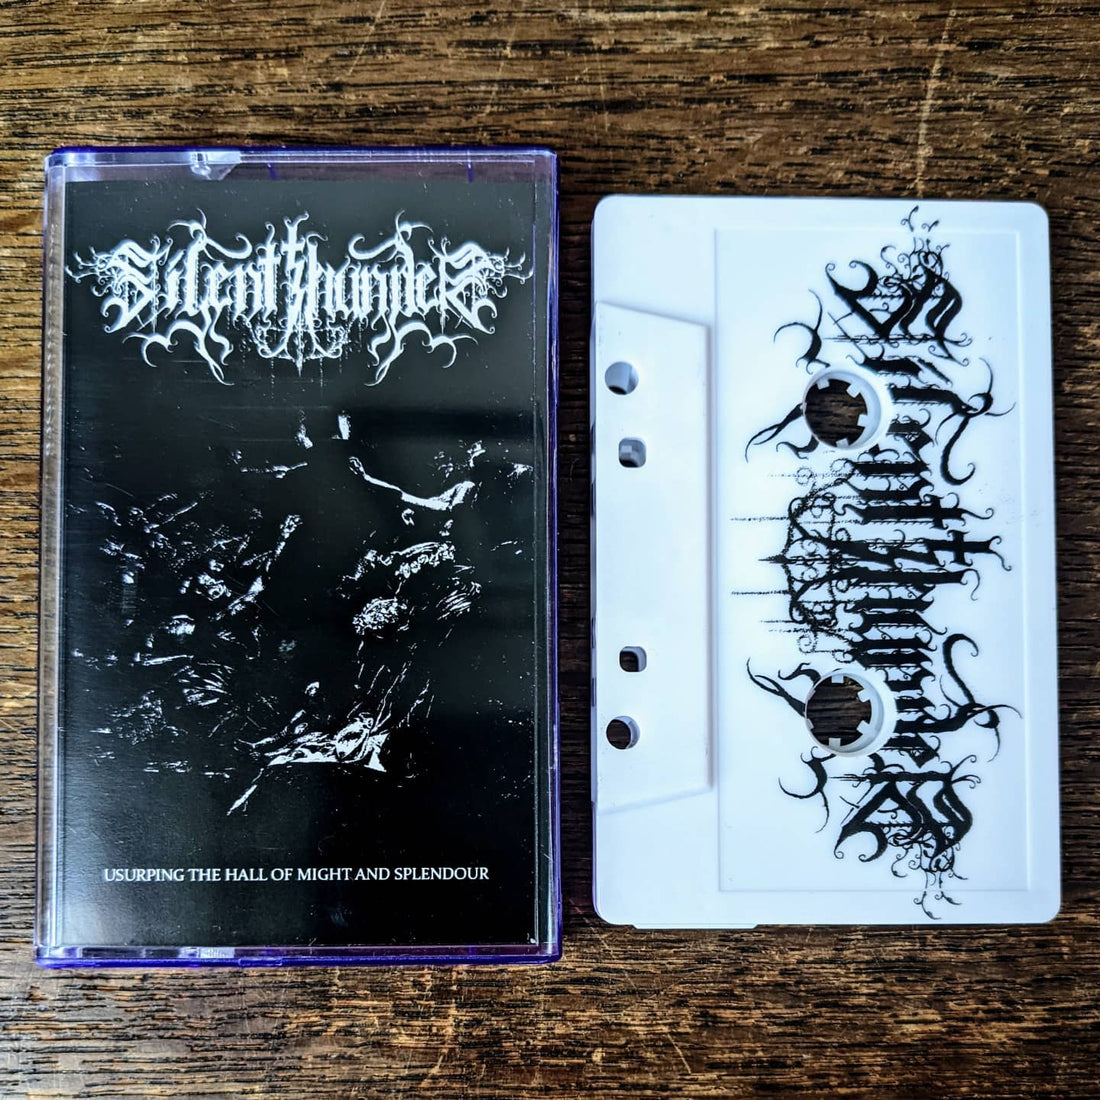 SILENT THUNDER tape repress out now which was part